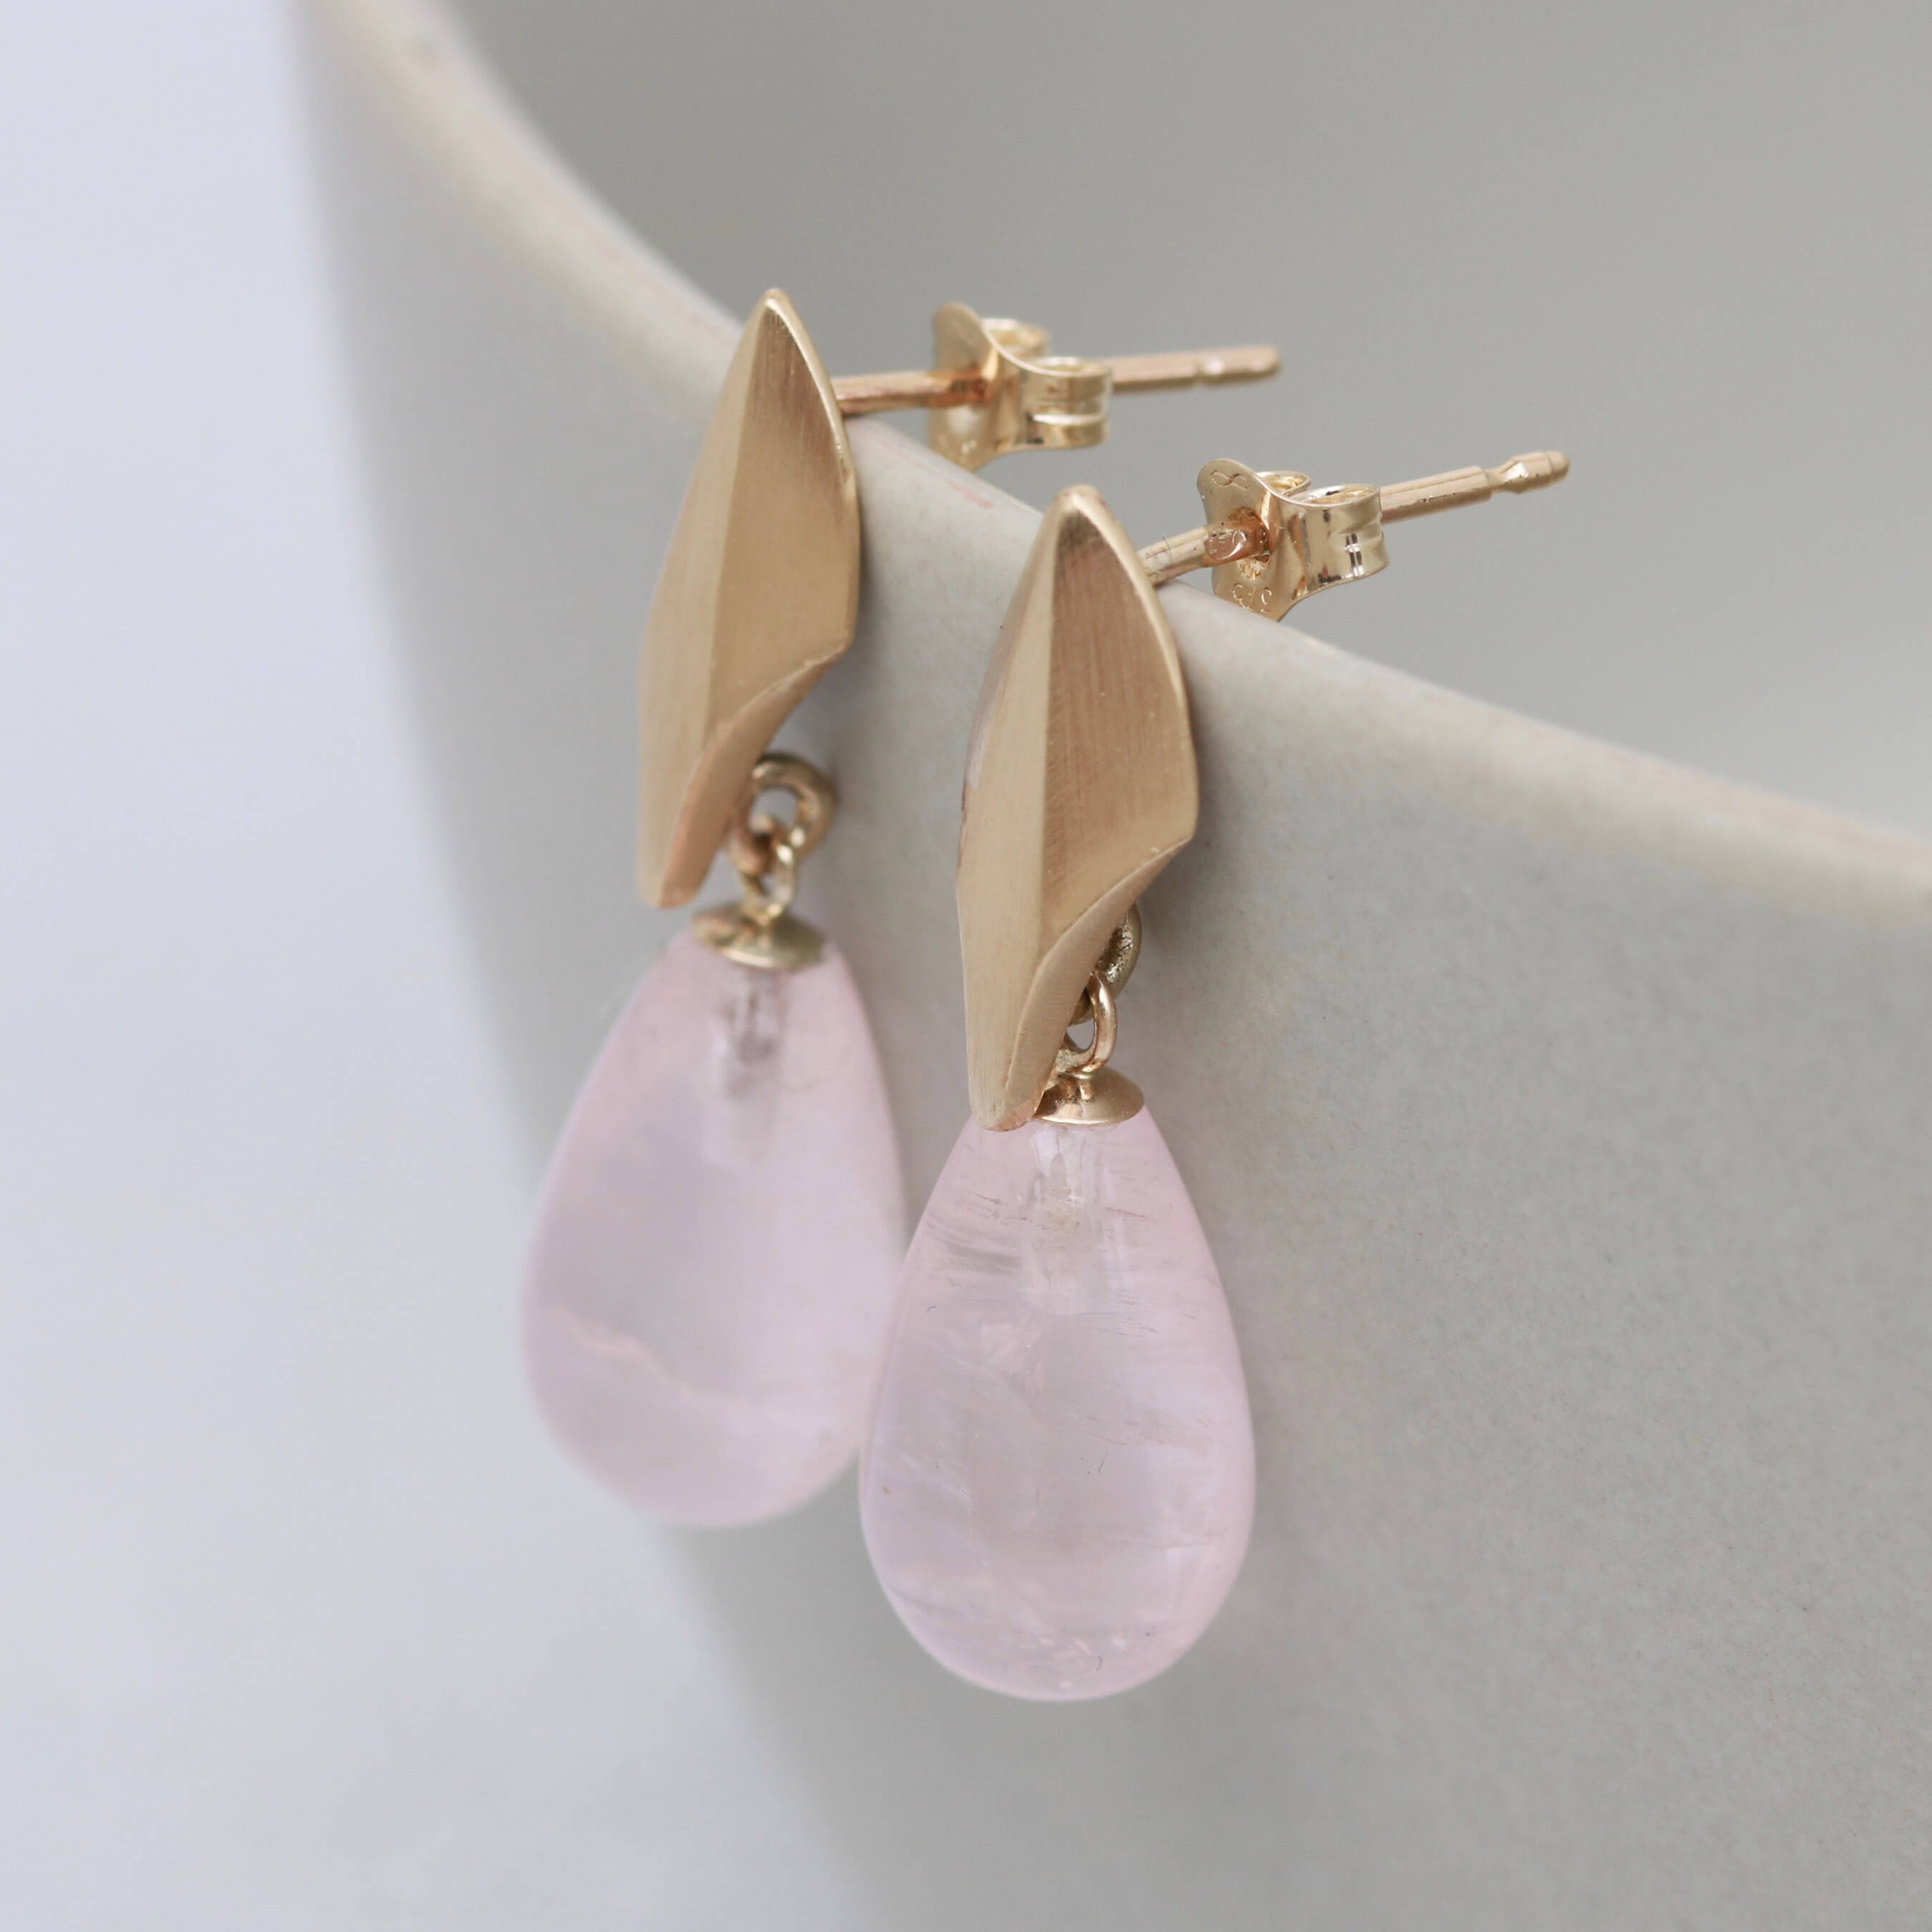 9ct Gold and Rose Quartz Earrings